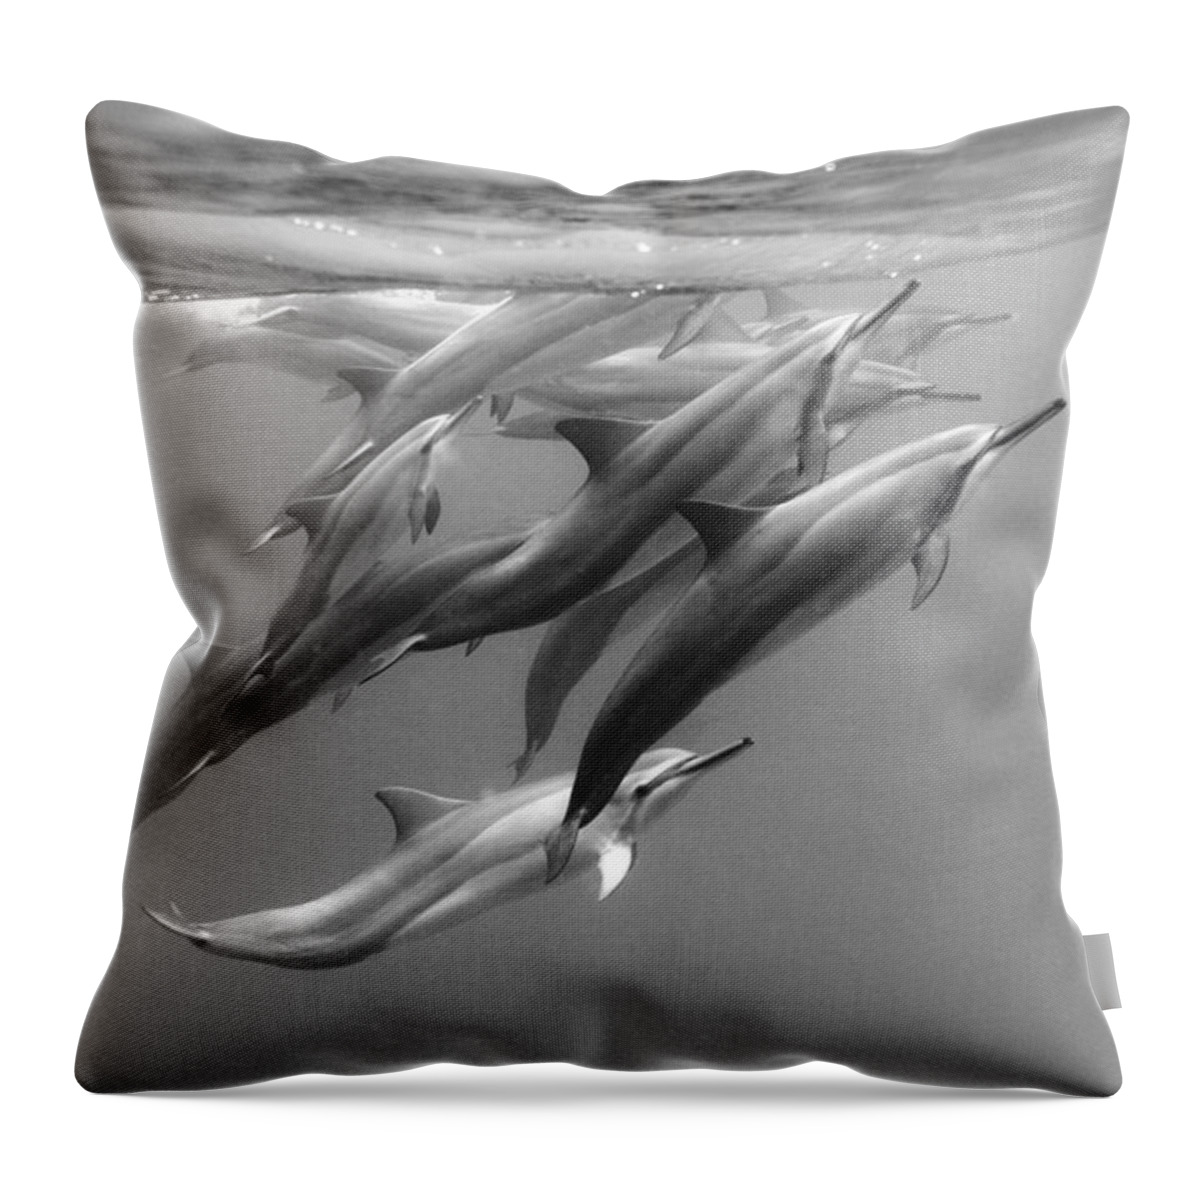 #faatoppicks Throw Pillow featuring the photograph Dolphin Pod by Sean Davey